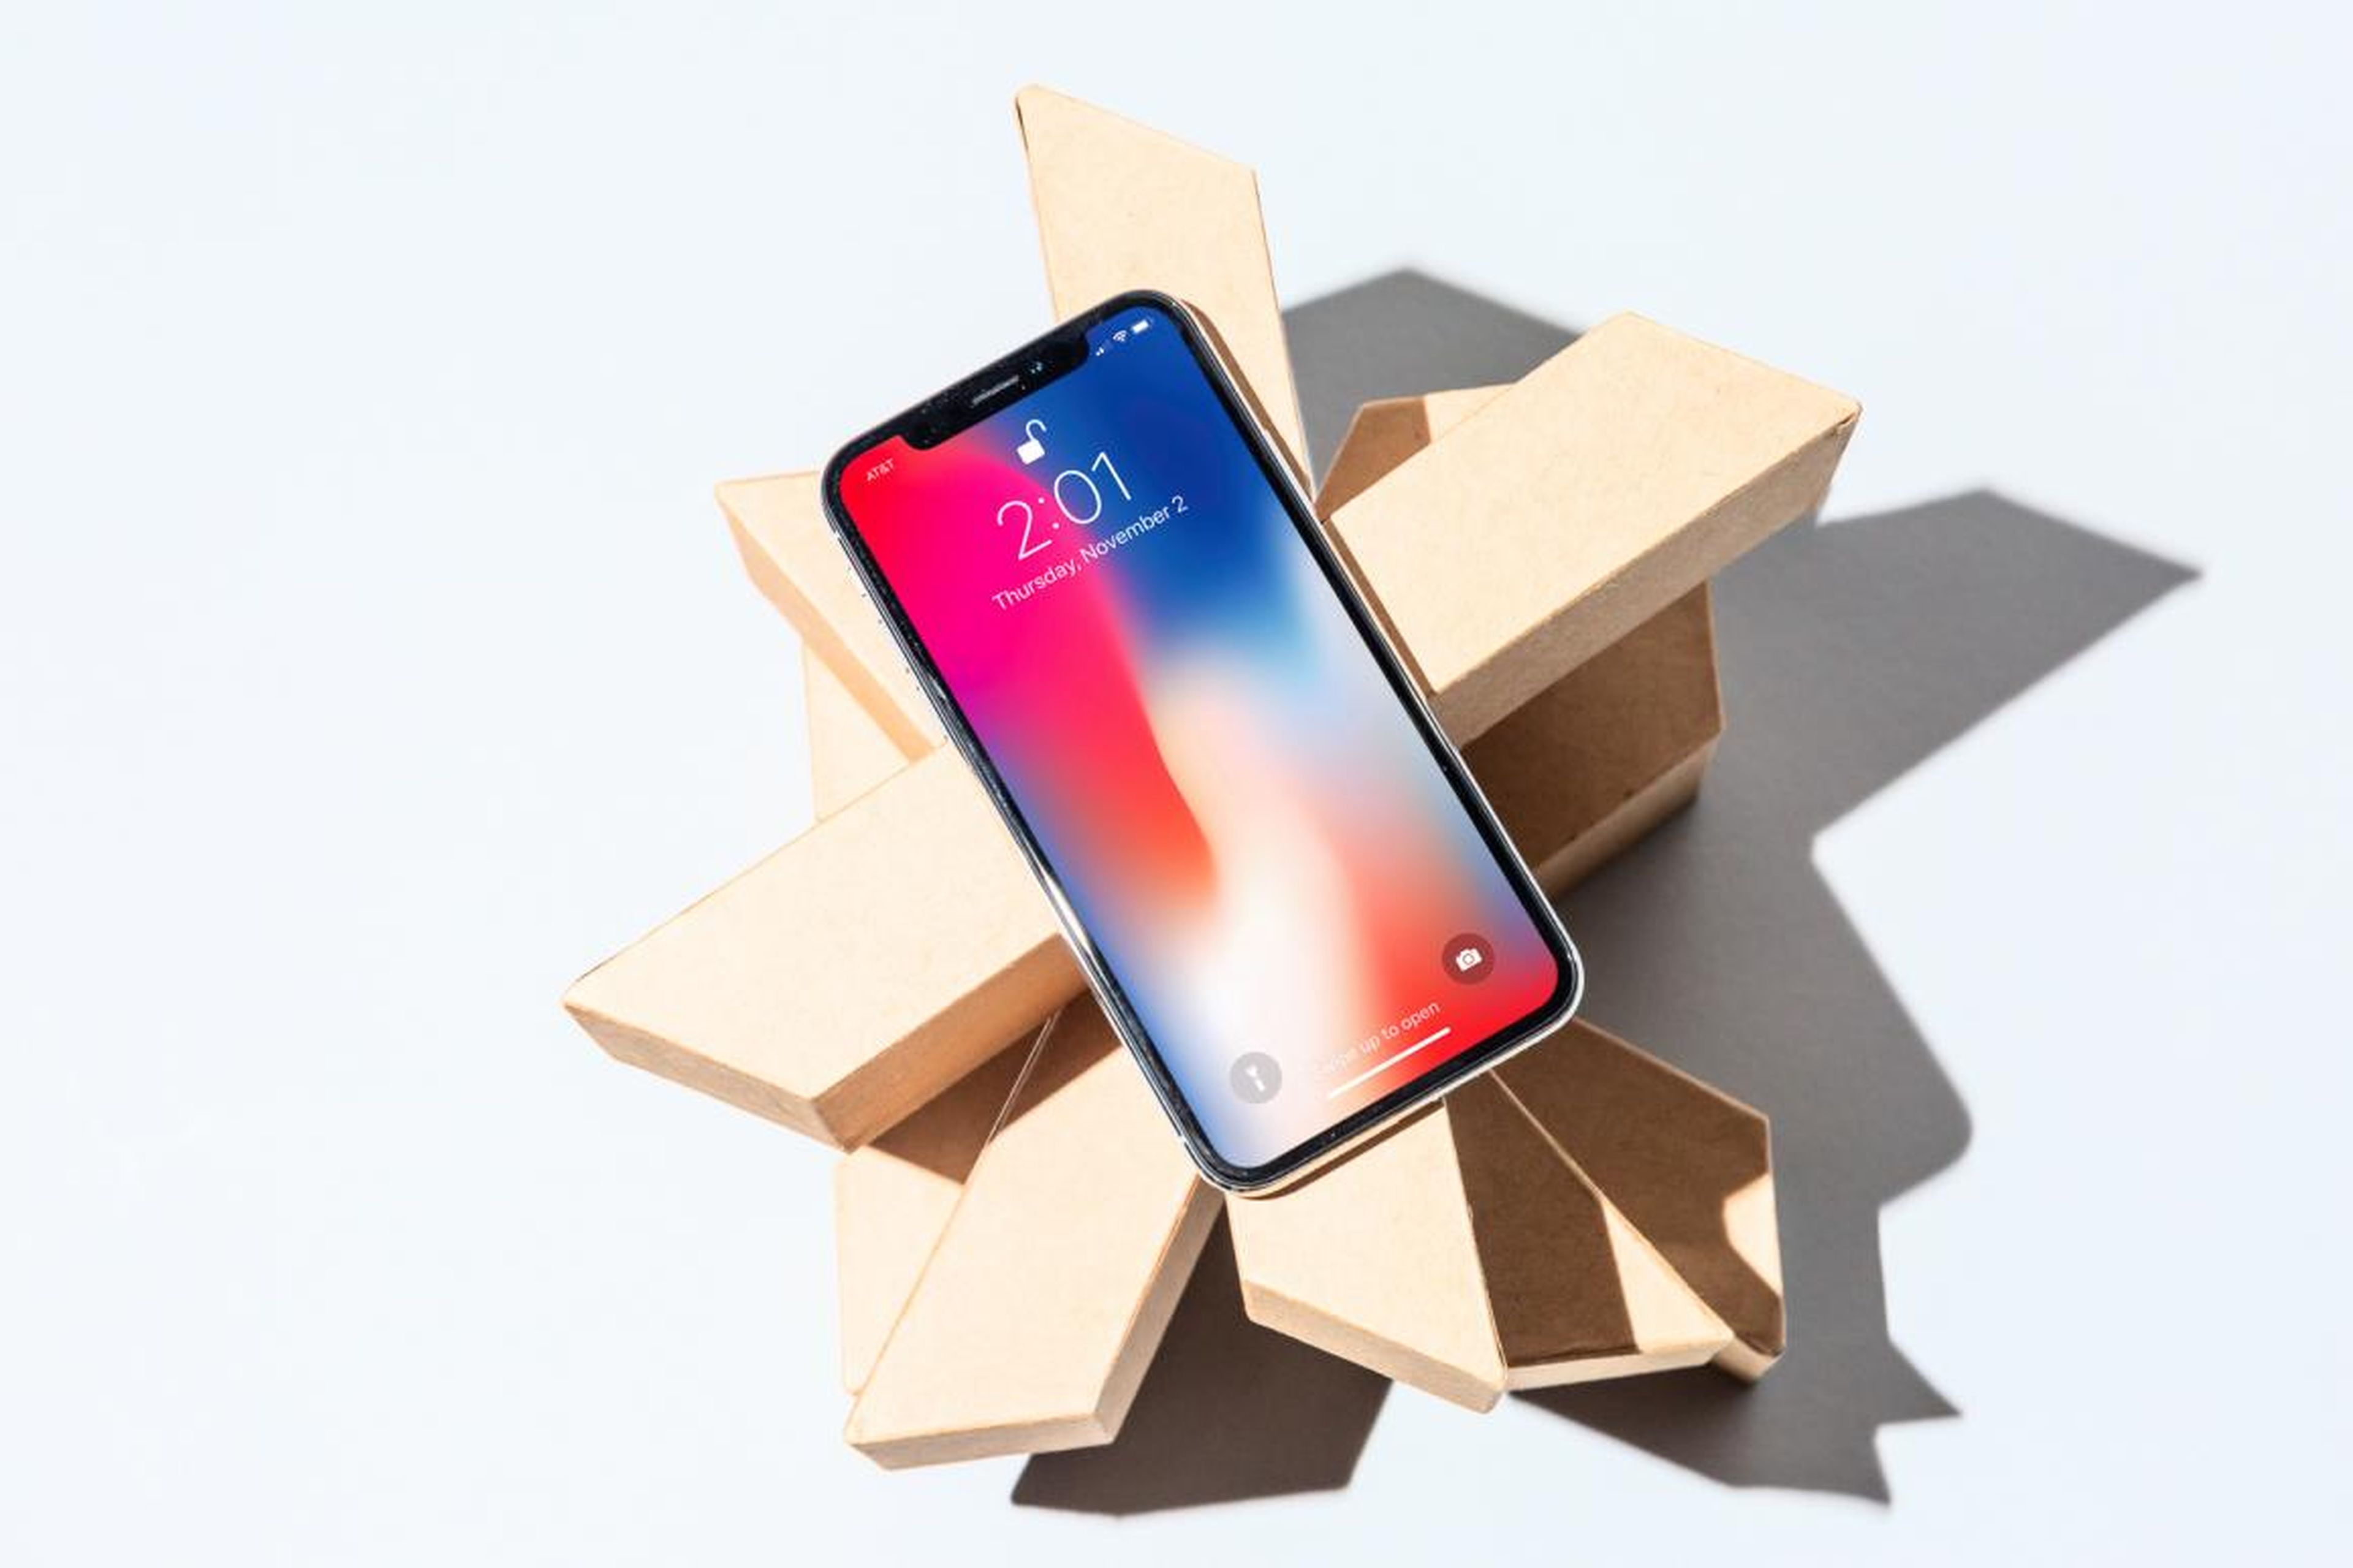 The iPhone X, the first Apple phone to have a $1,000 base price, was the most prominent example of its recent price hikes.